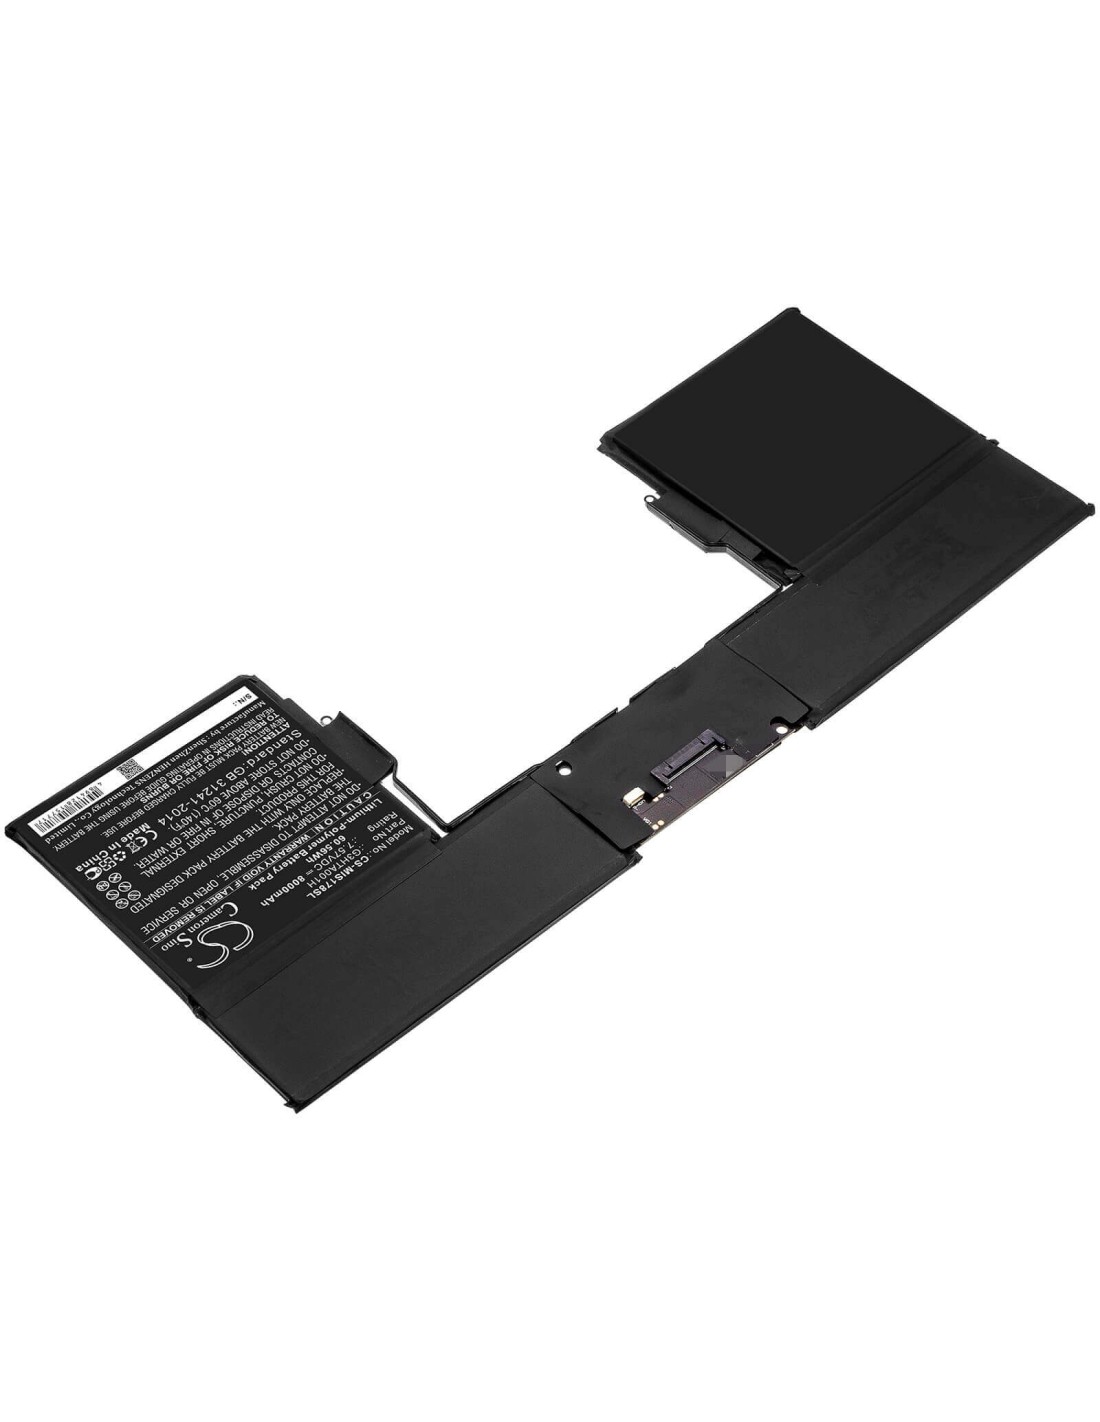 Battery for Microsoft, Surface Book 1785 7.57V, 8000mAh - 60.56Wh